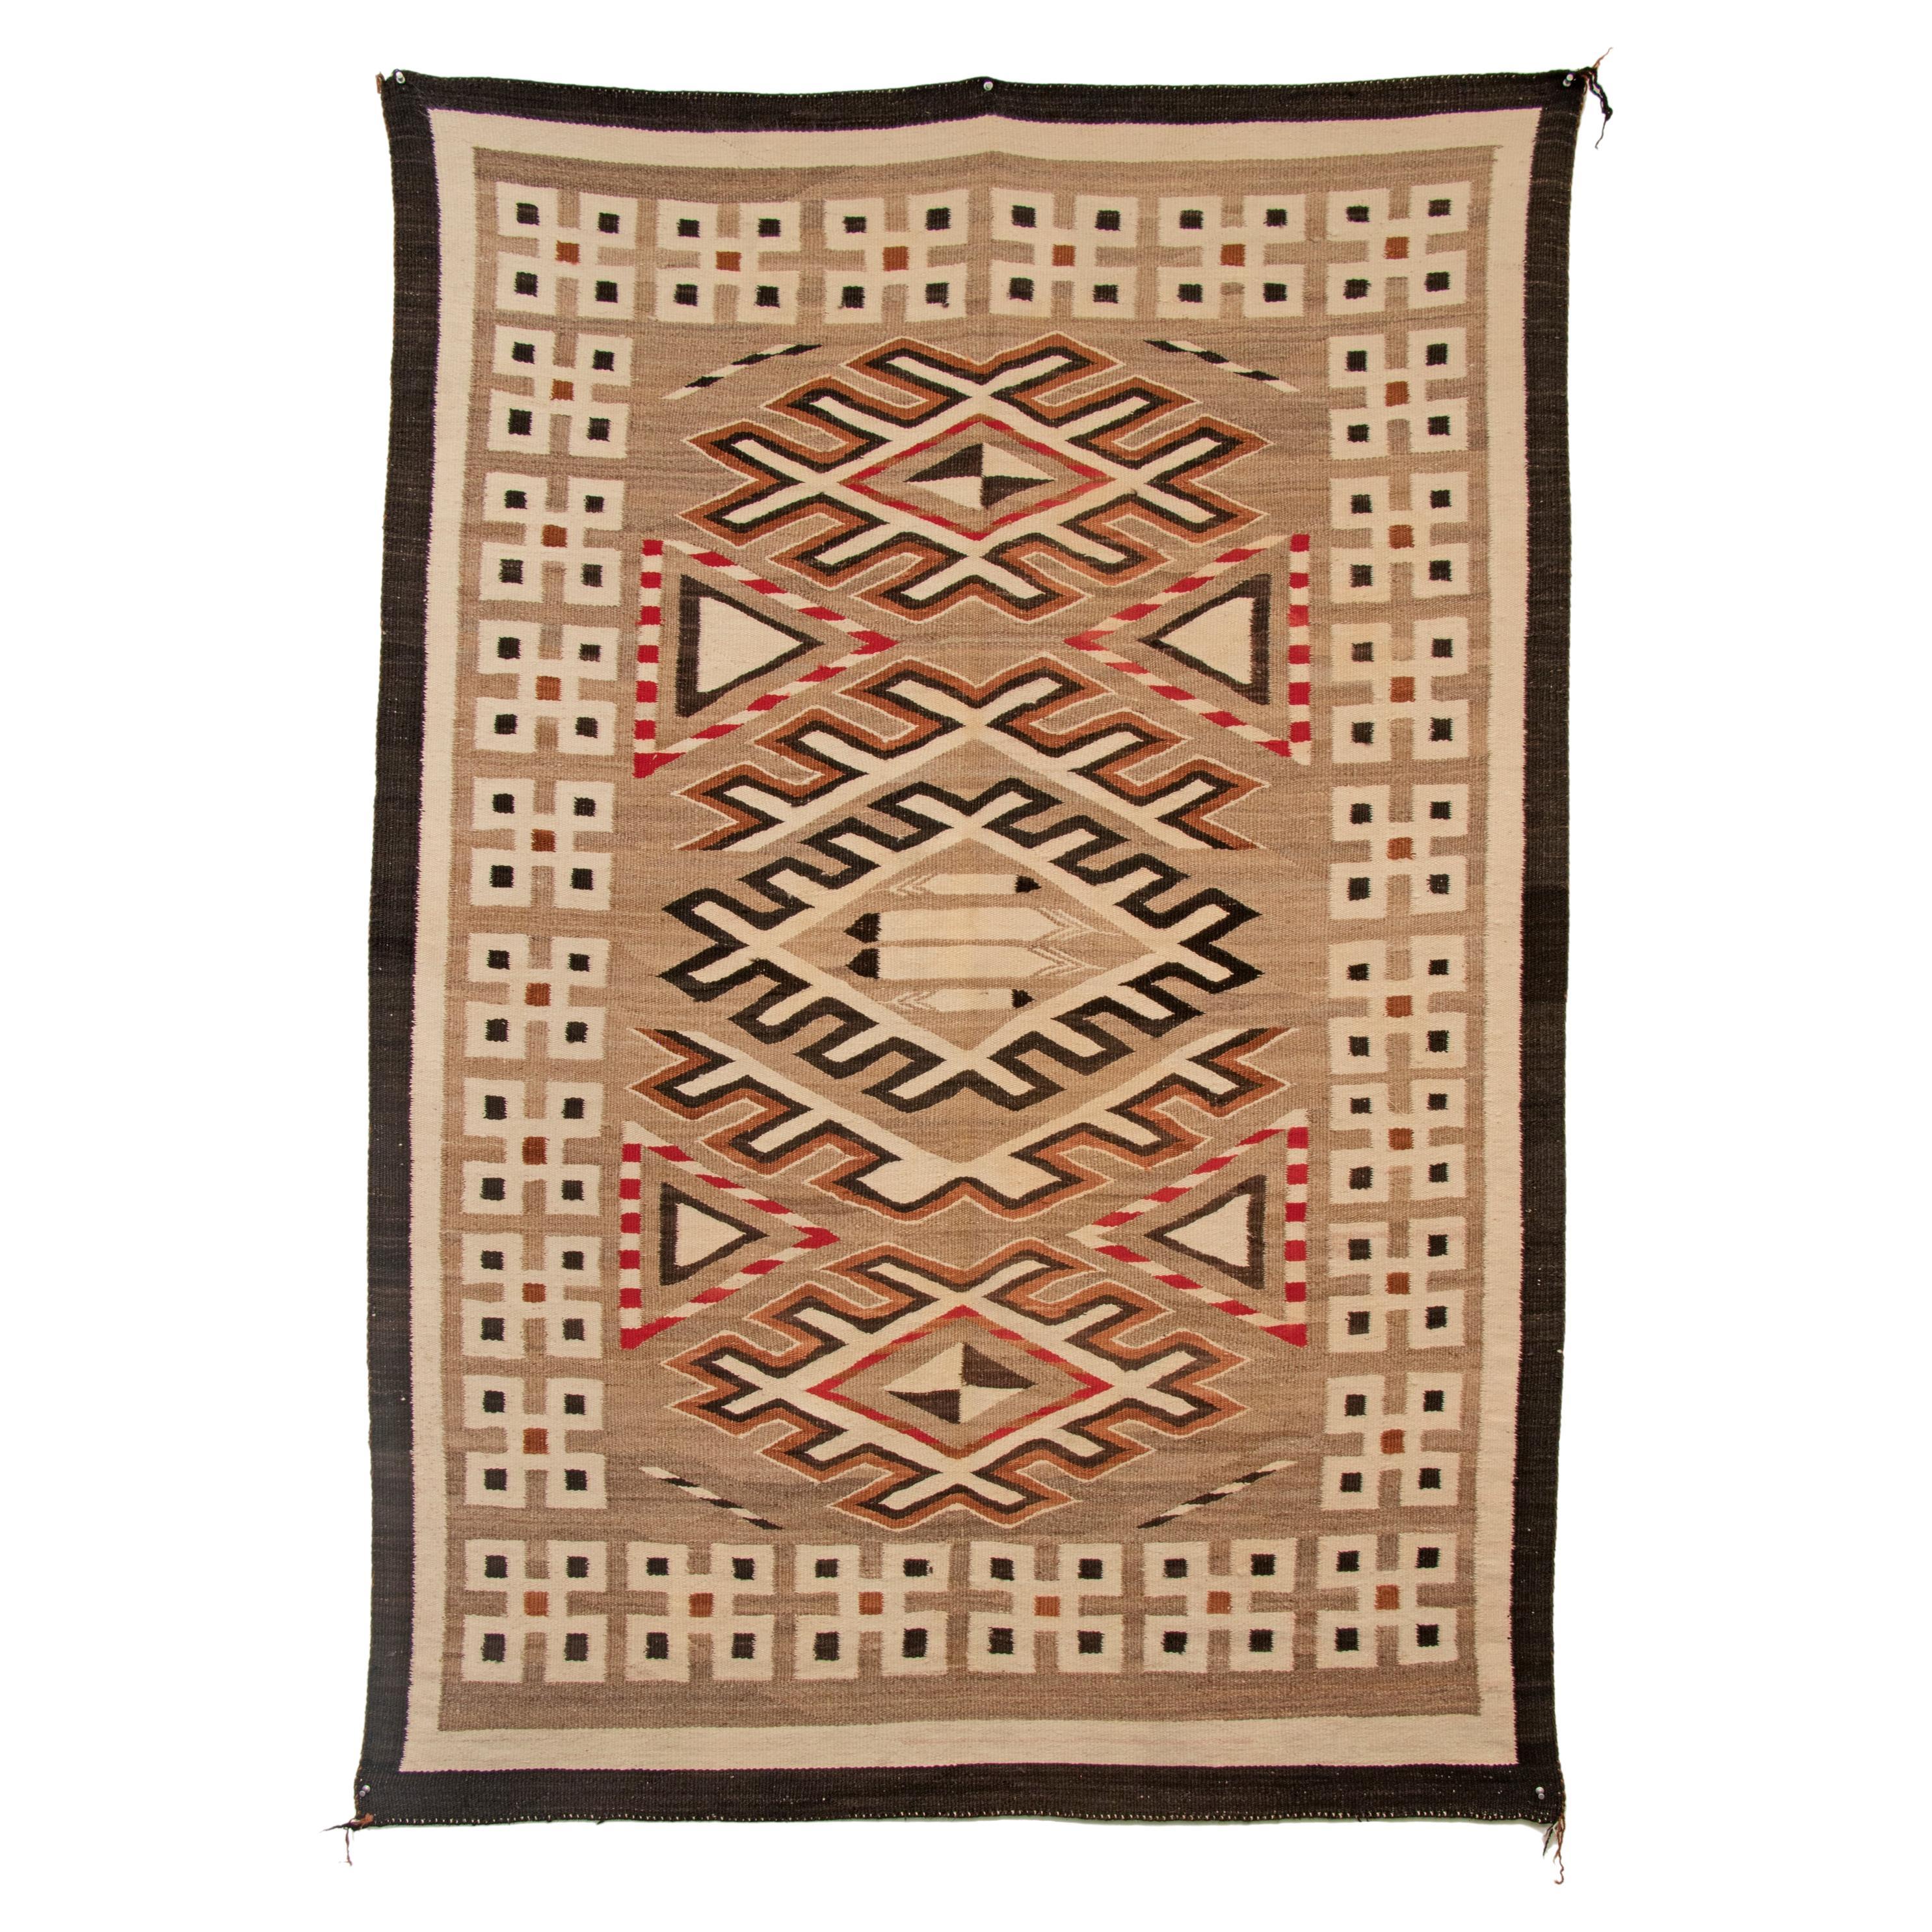 Vintage 20th Century Navajo Rug from the Trading Post Era